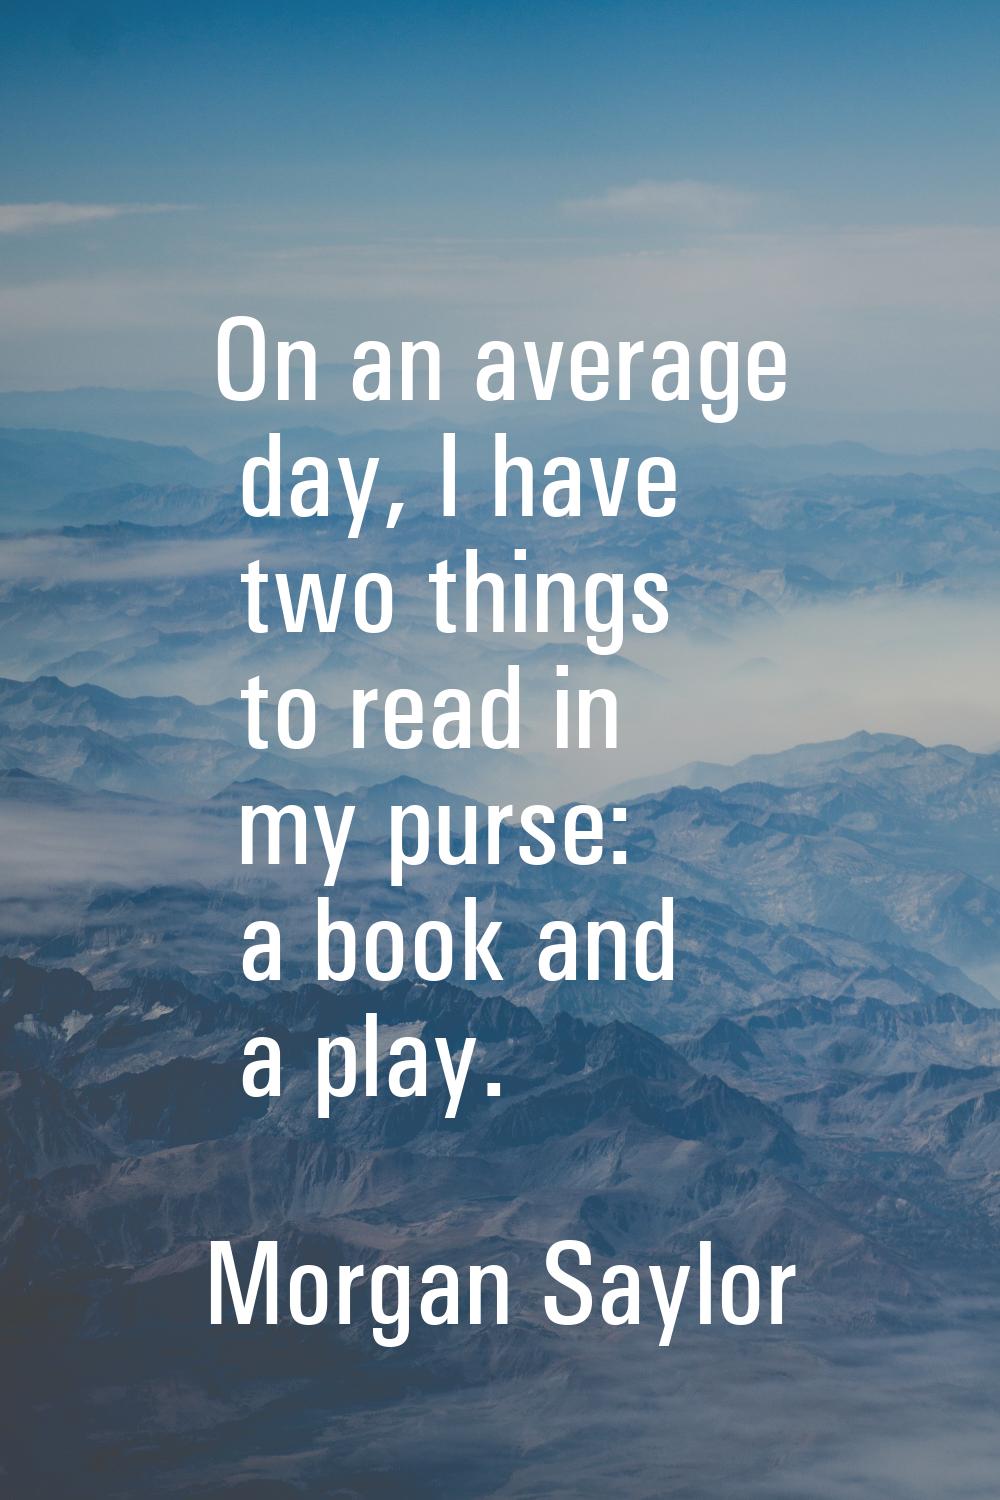 On an average day, I have two things to read in my purse: a book and a play.